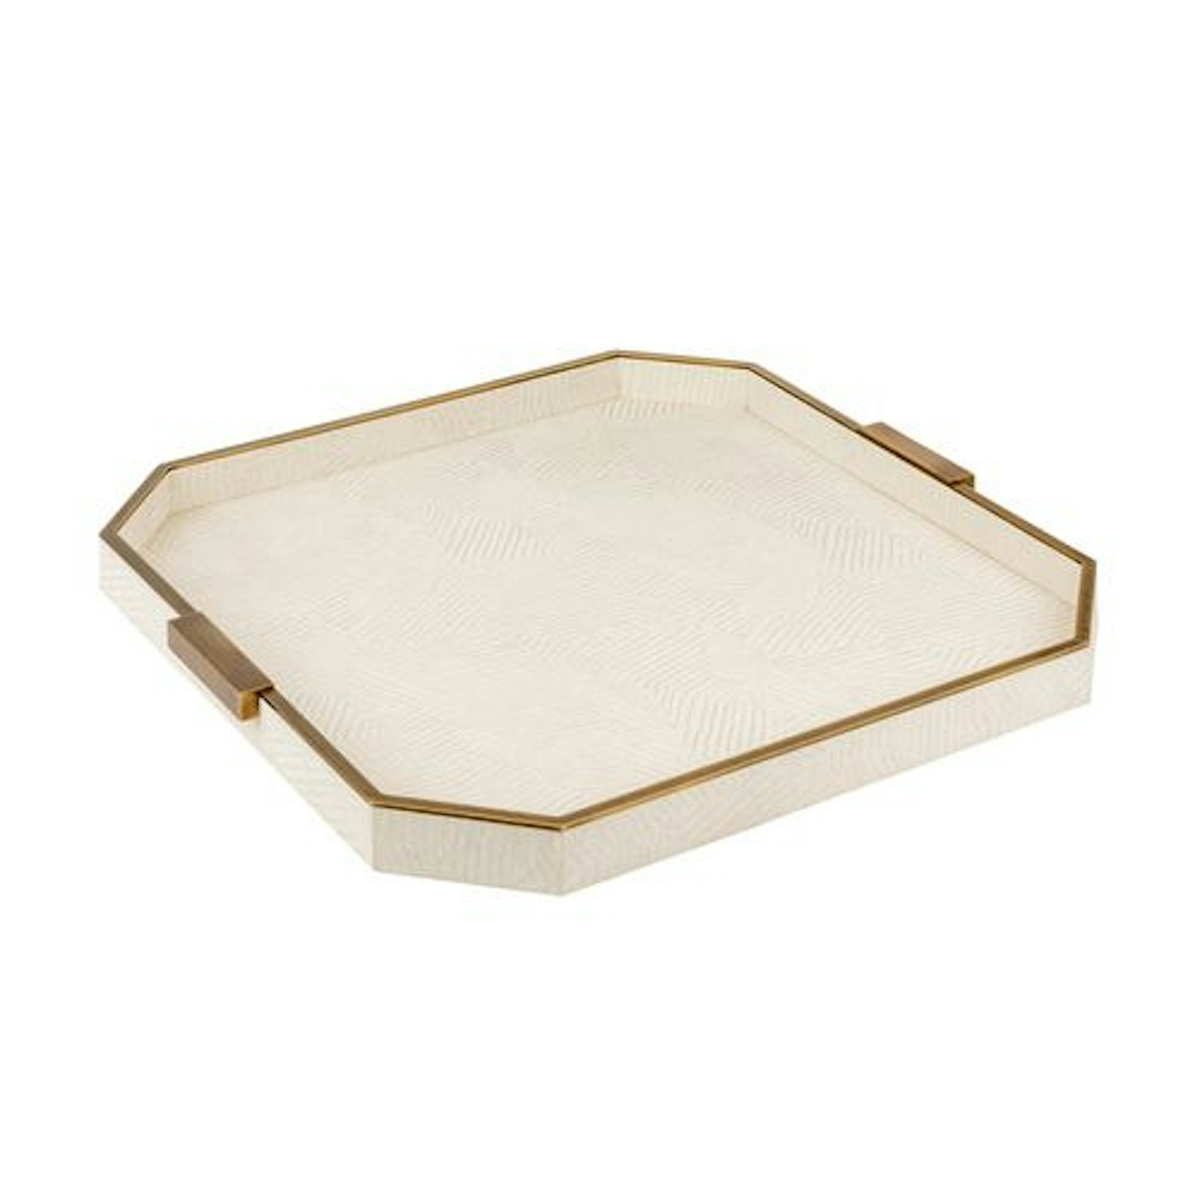 Elemental Square Tray, Ivory - 21 Best Decorative Trays To Buy For Your Tabletop - LuxDeco.com